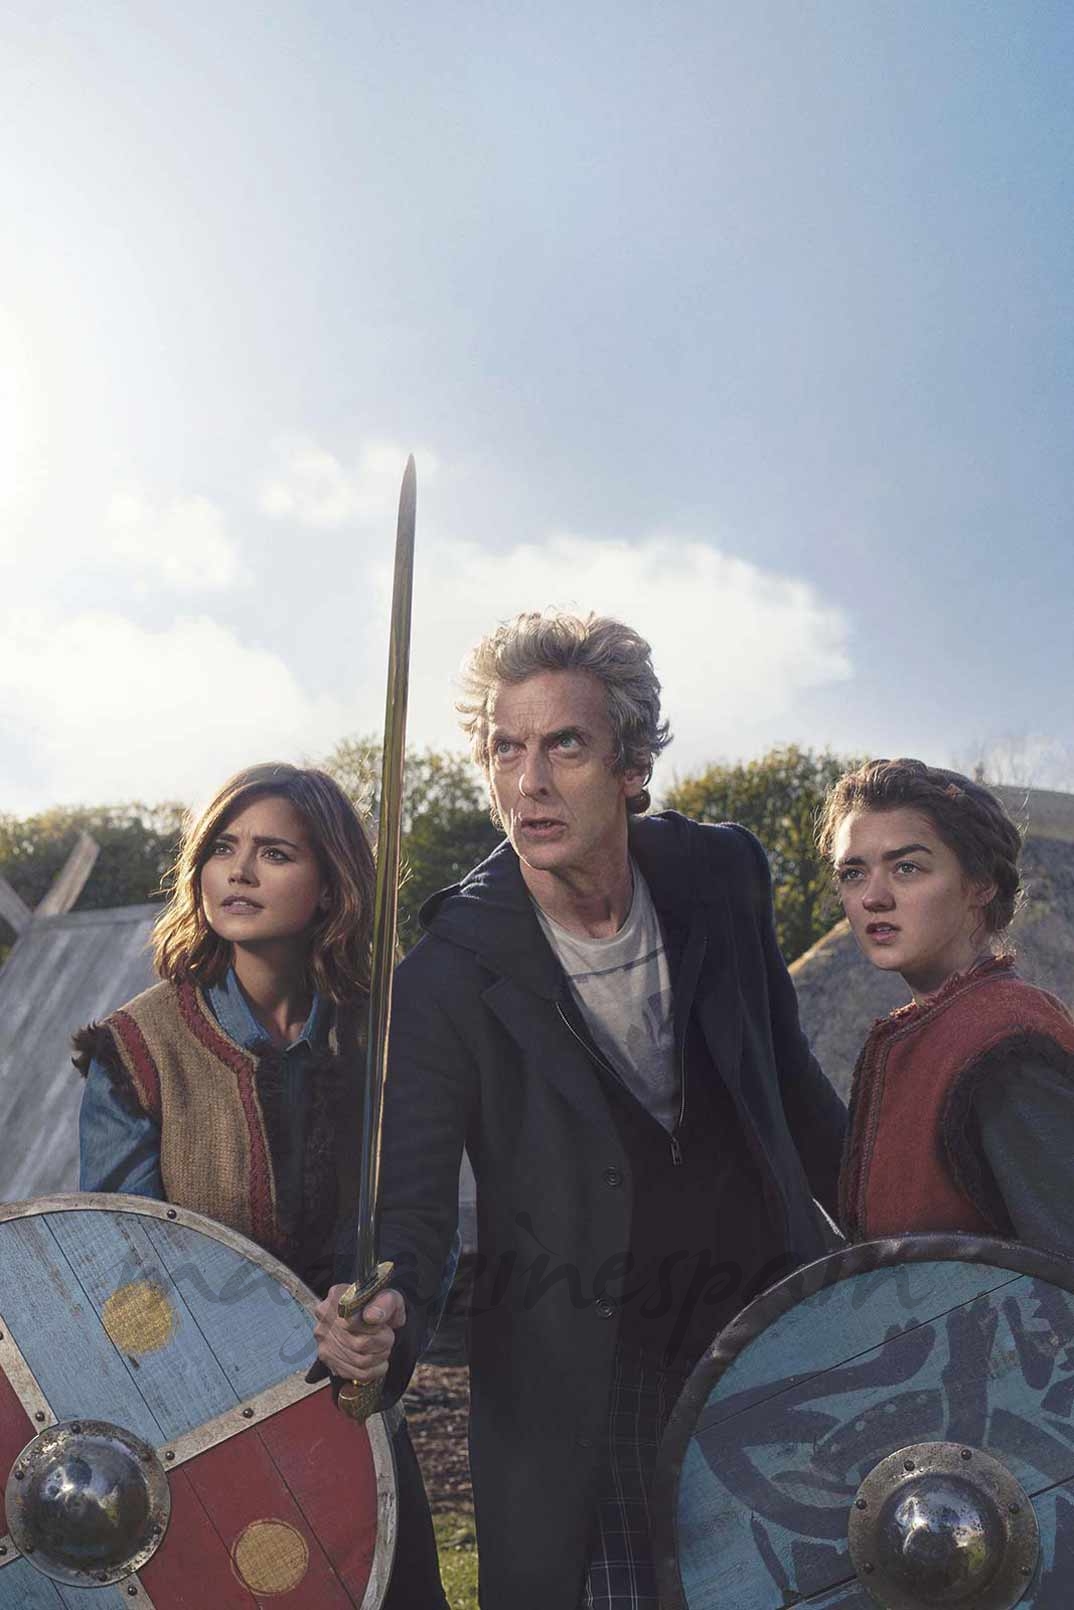 Jenna Coleman, Maisie Williams, Peter Capaldi - Doctor Who